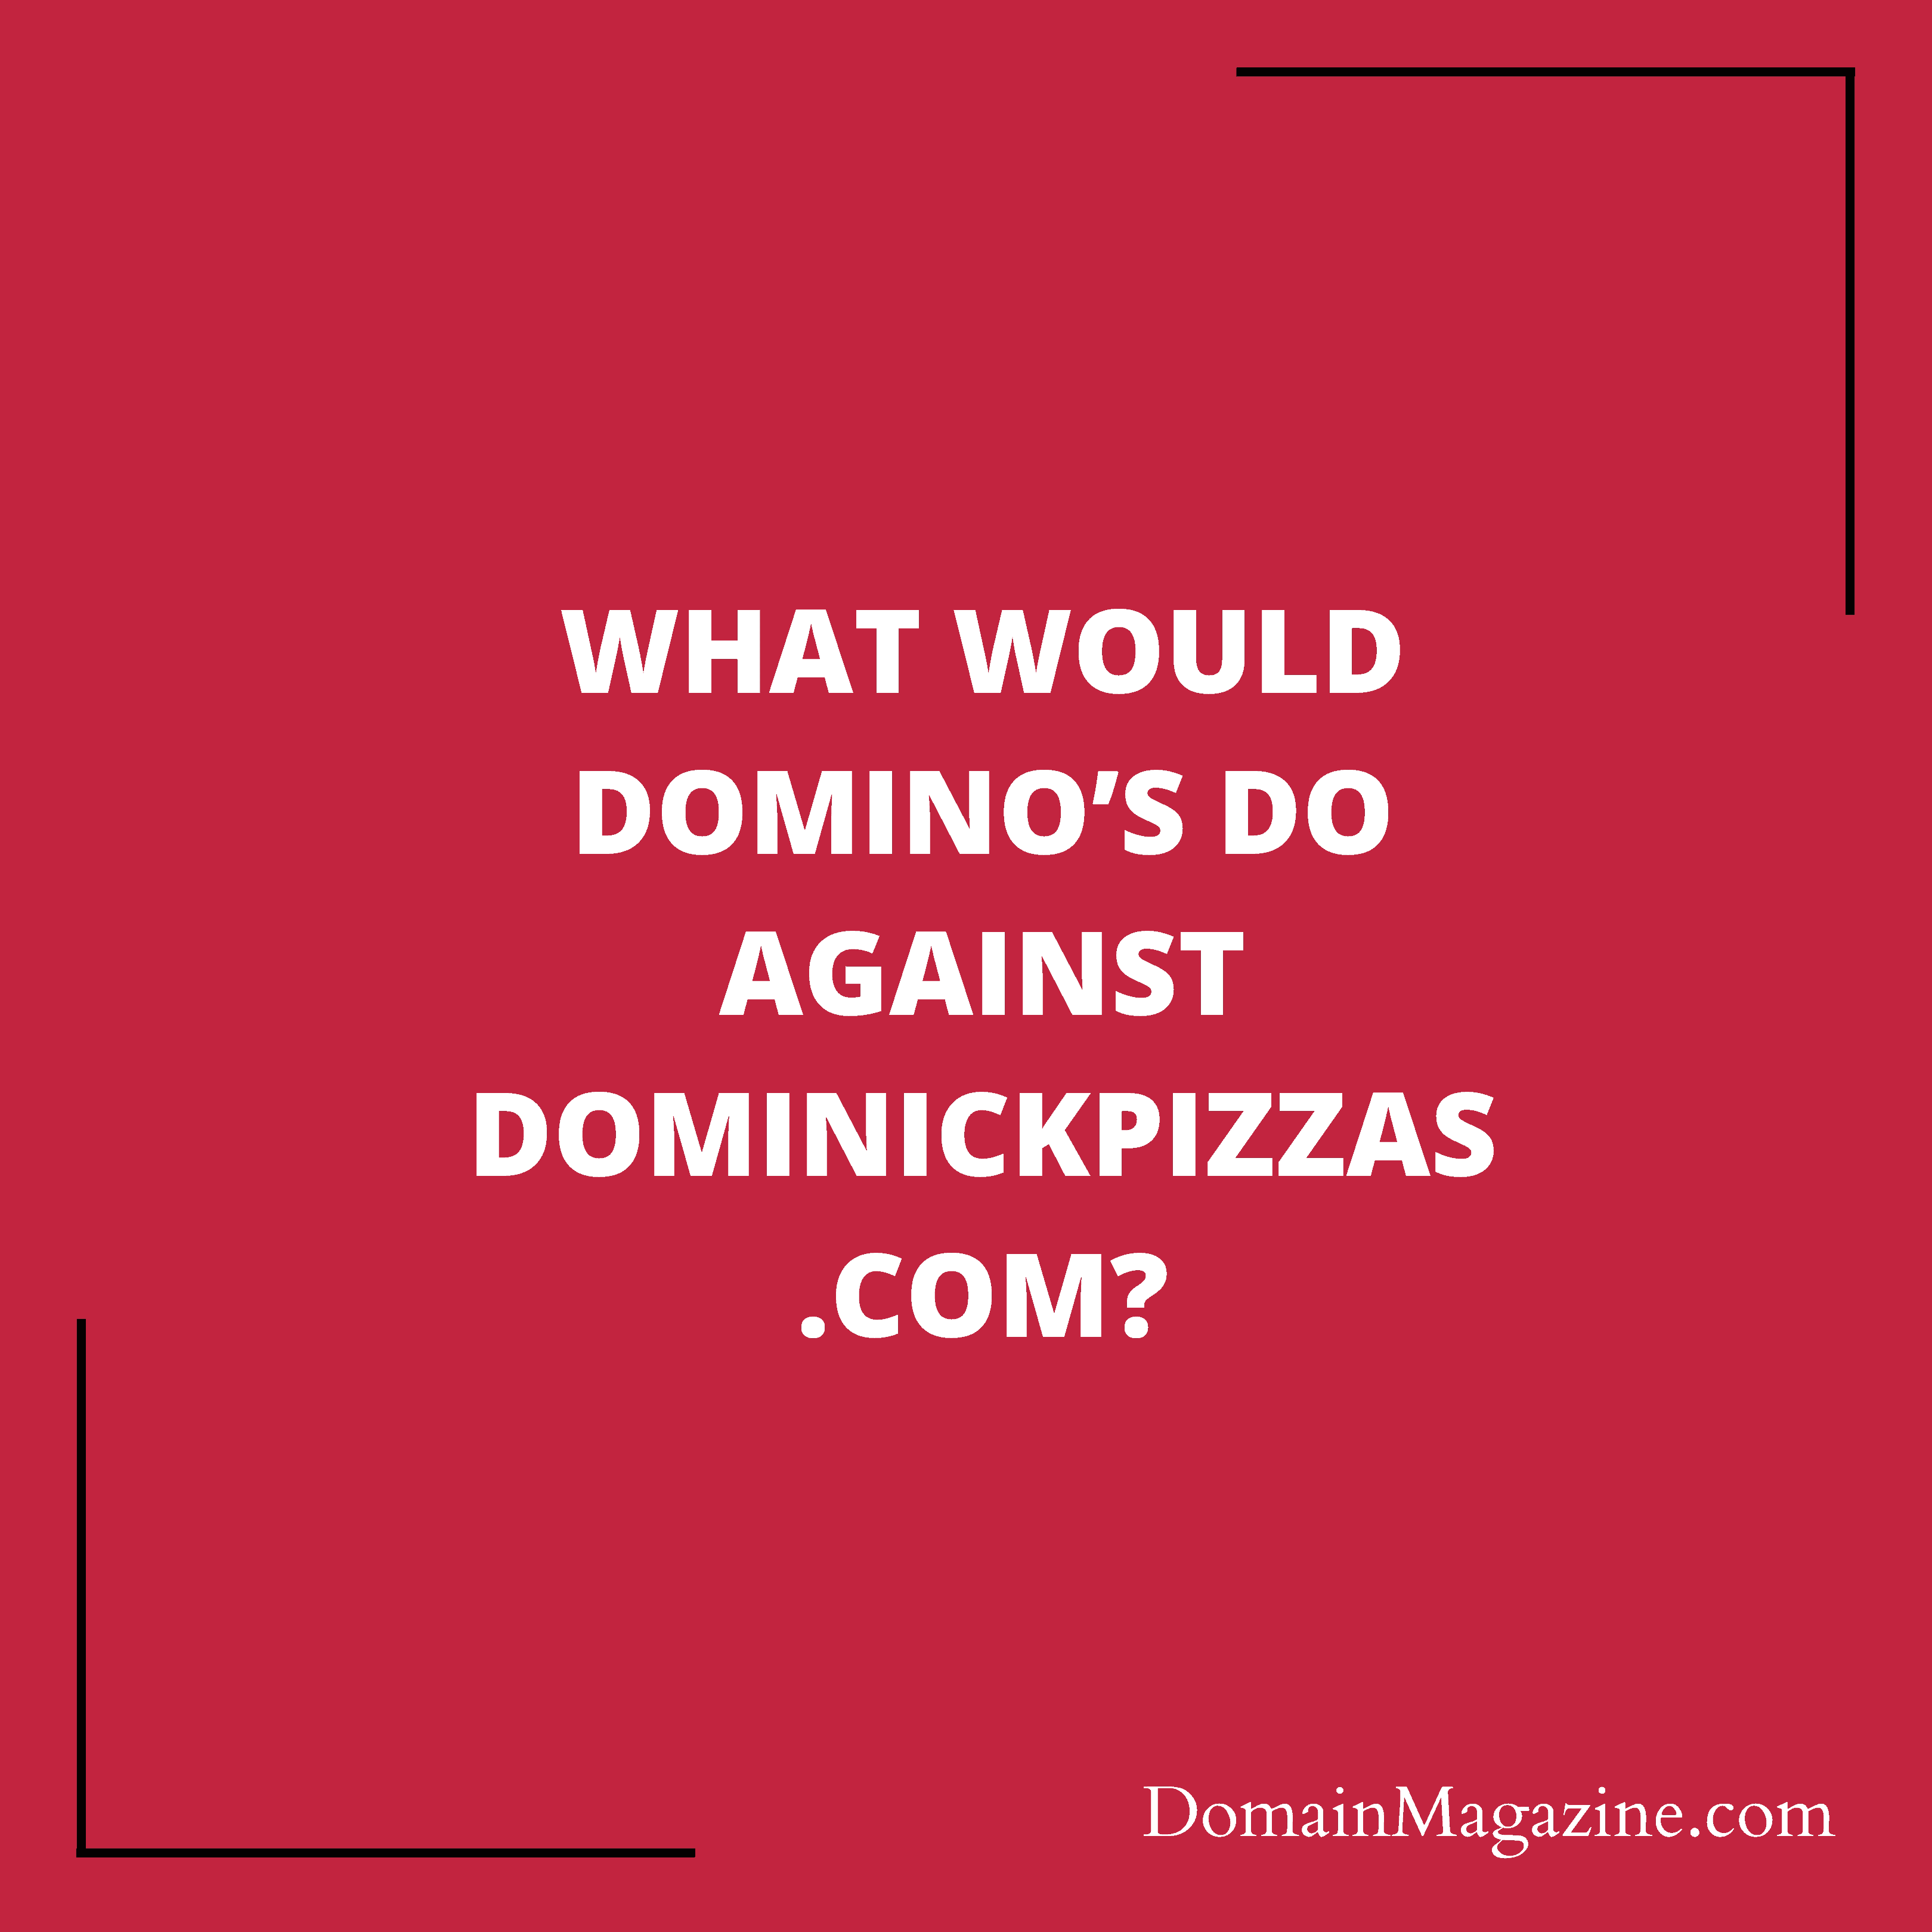 What would Domino’s do against DominickPizzas.com?